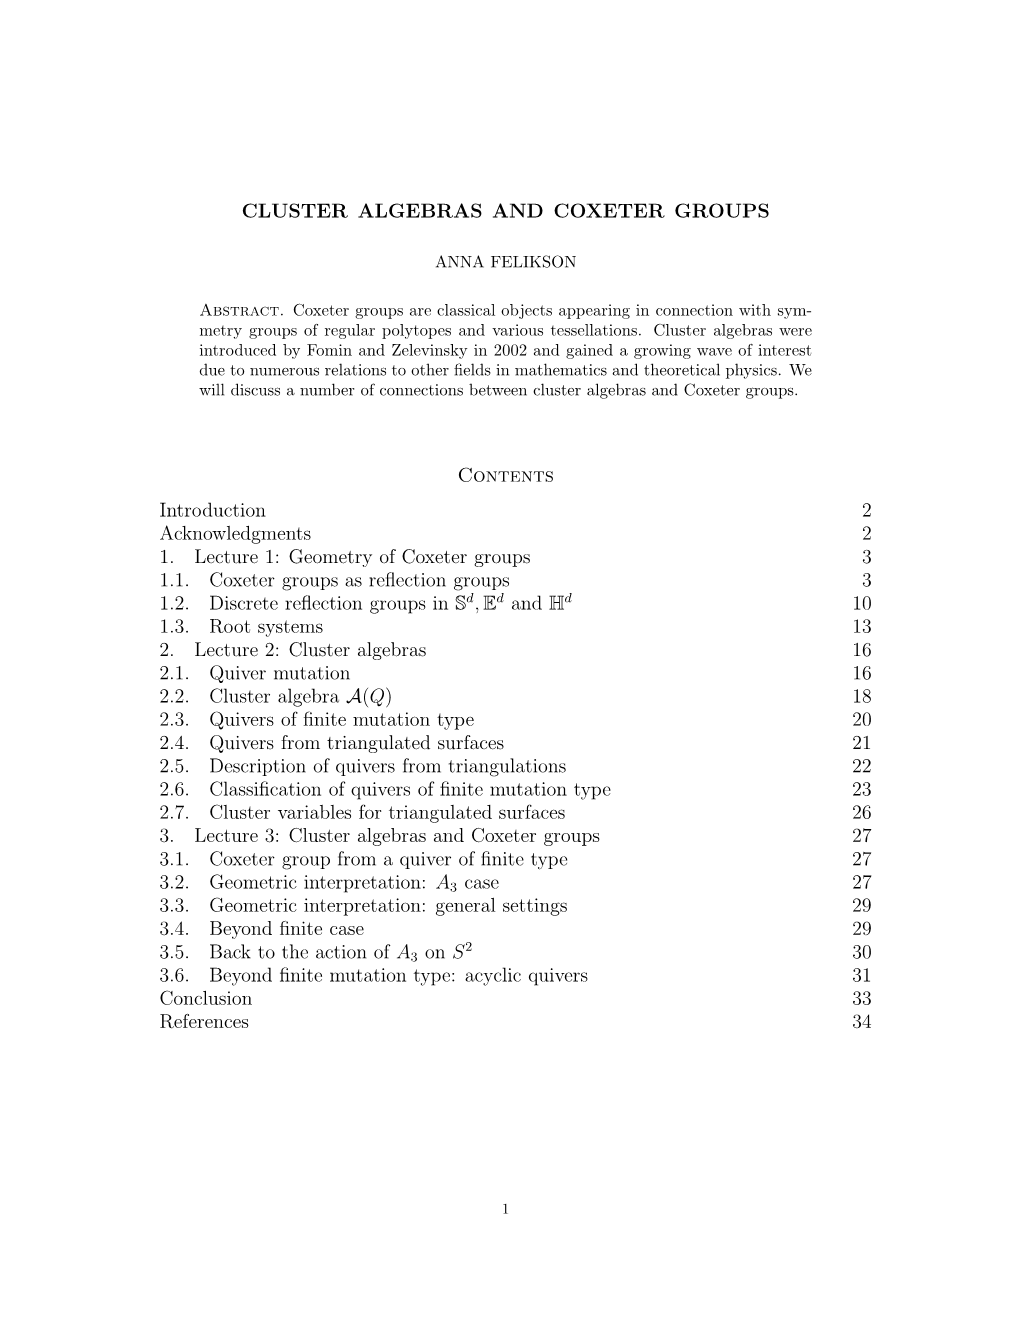 Cluster Algebras and Coxeter Groups